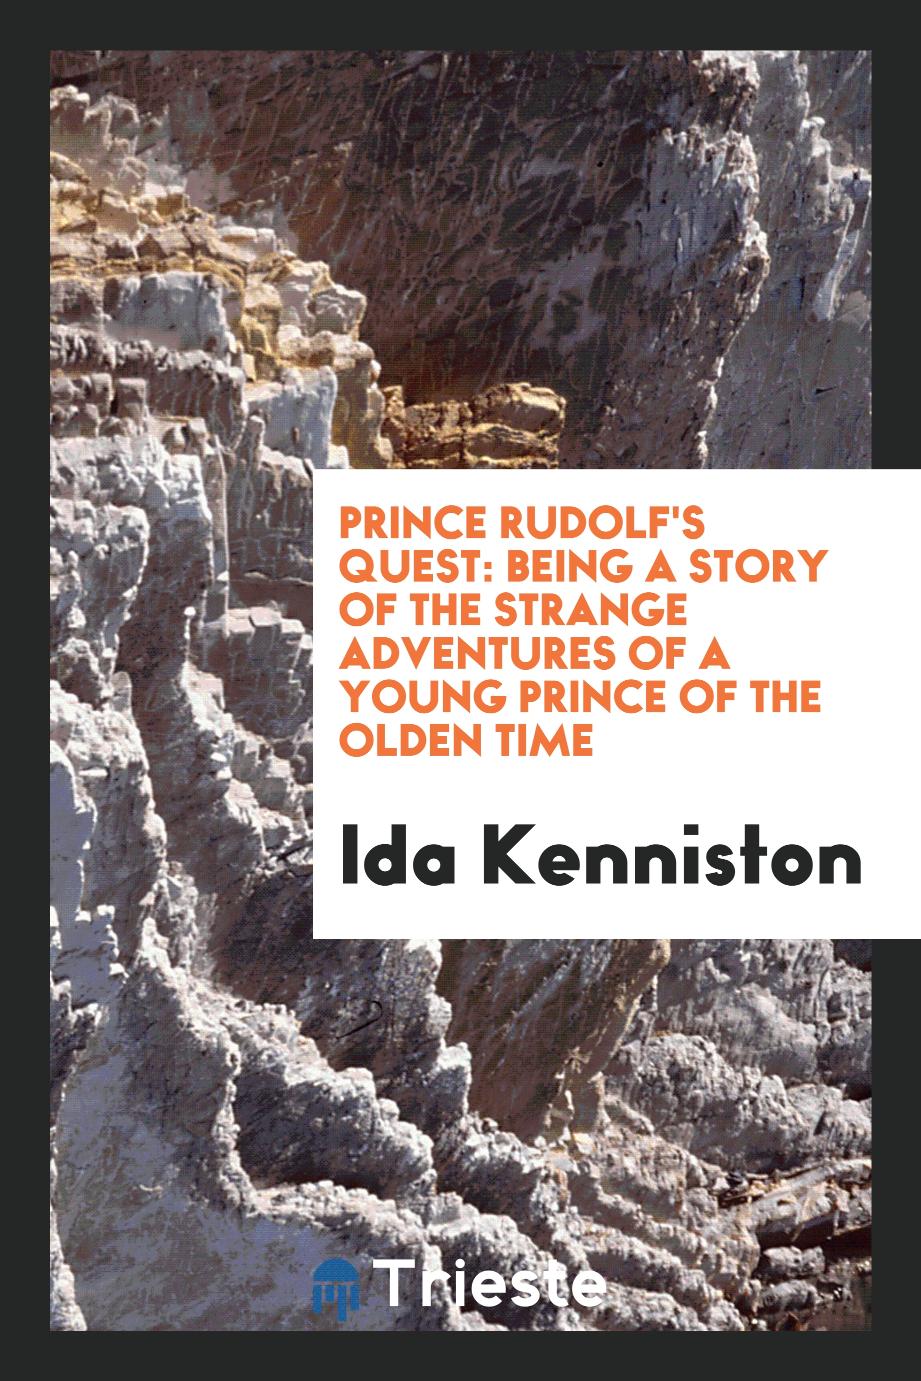 Prince Rudolf's Quest: Being a Story of the Strange Adventures of a Young Prince of the Olden Time